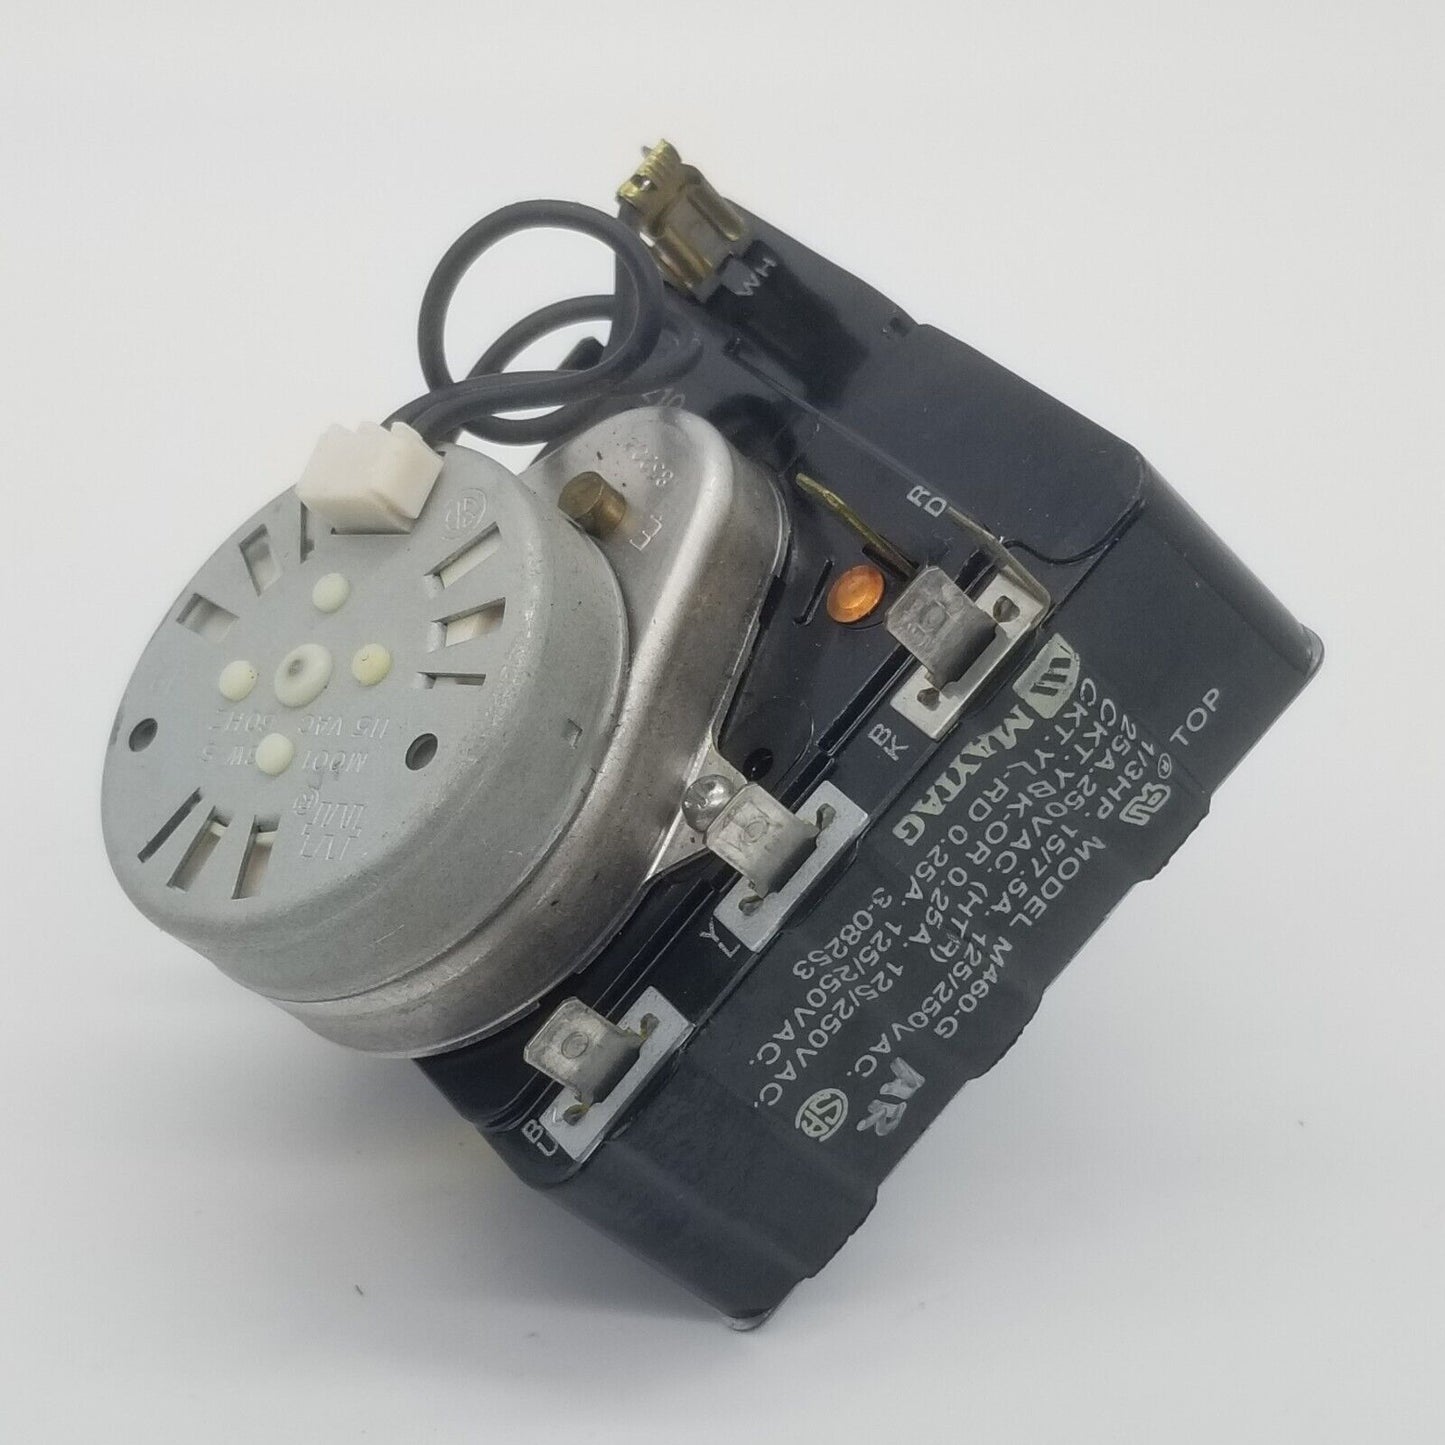 Genuine OEM Replacement for Maytag Dryer Timer 3-08253 ⭐️